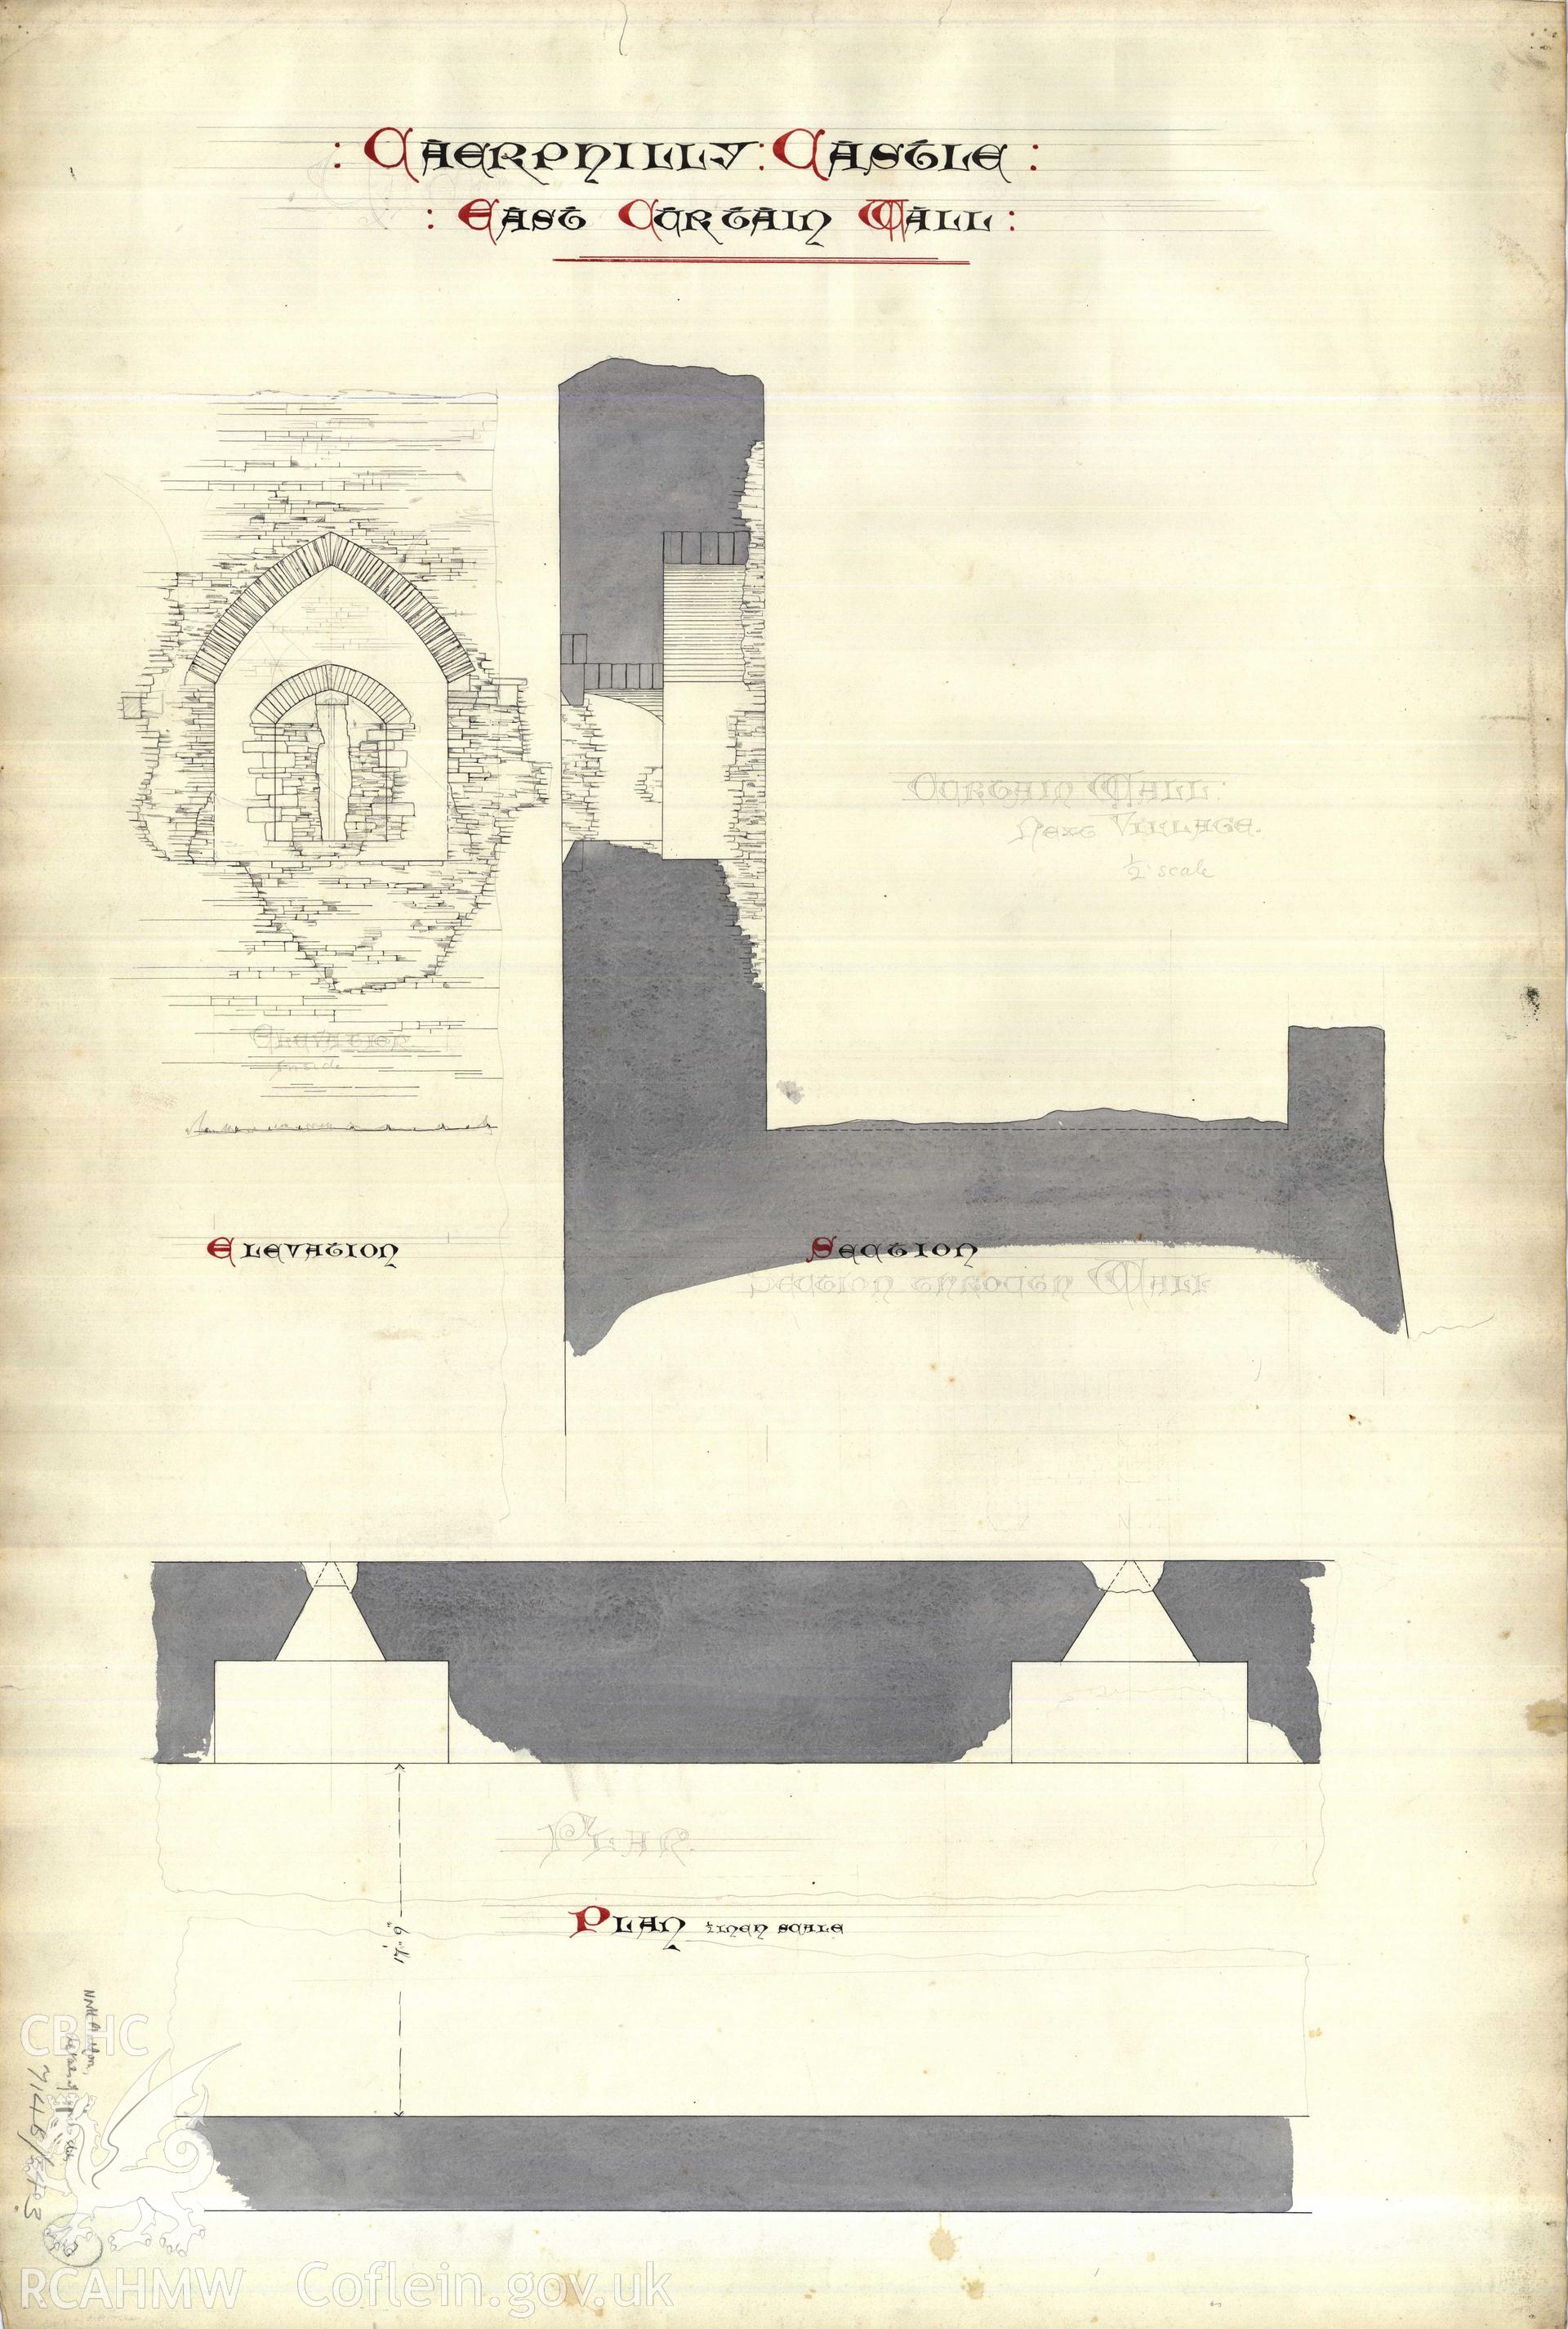 Cadw guardianship monument drawing of Caerphilly Castle. Dam front N, arrowslits. Cadw Ref. No:714B/343. Scale 1:24.